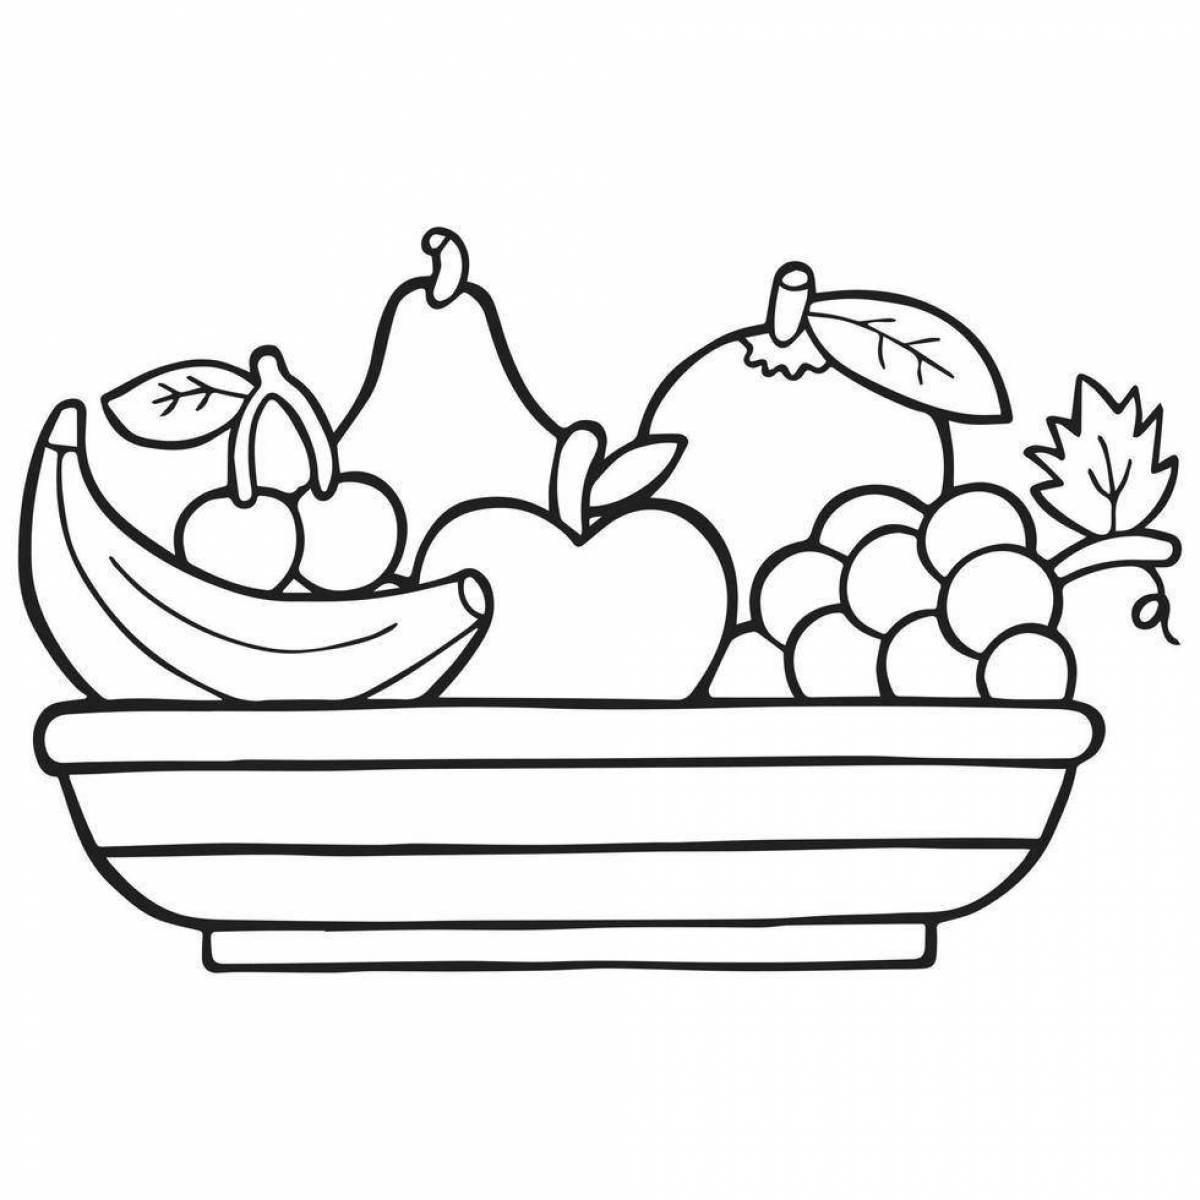 Bright fruit bowl empty coloring book for kids